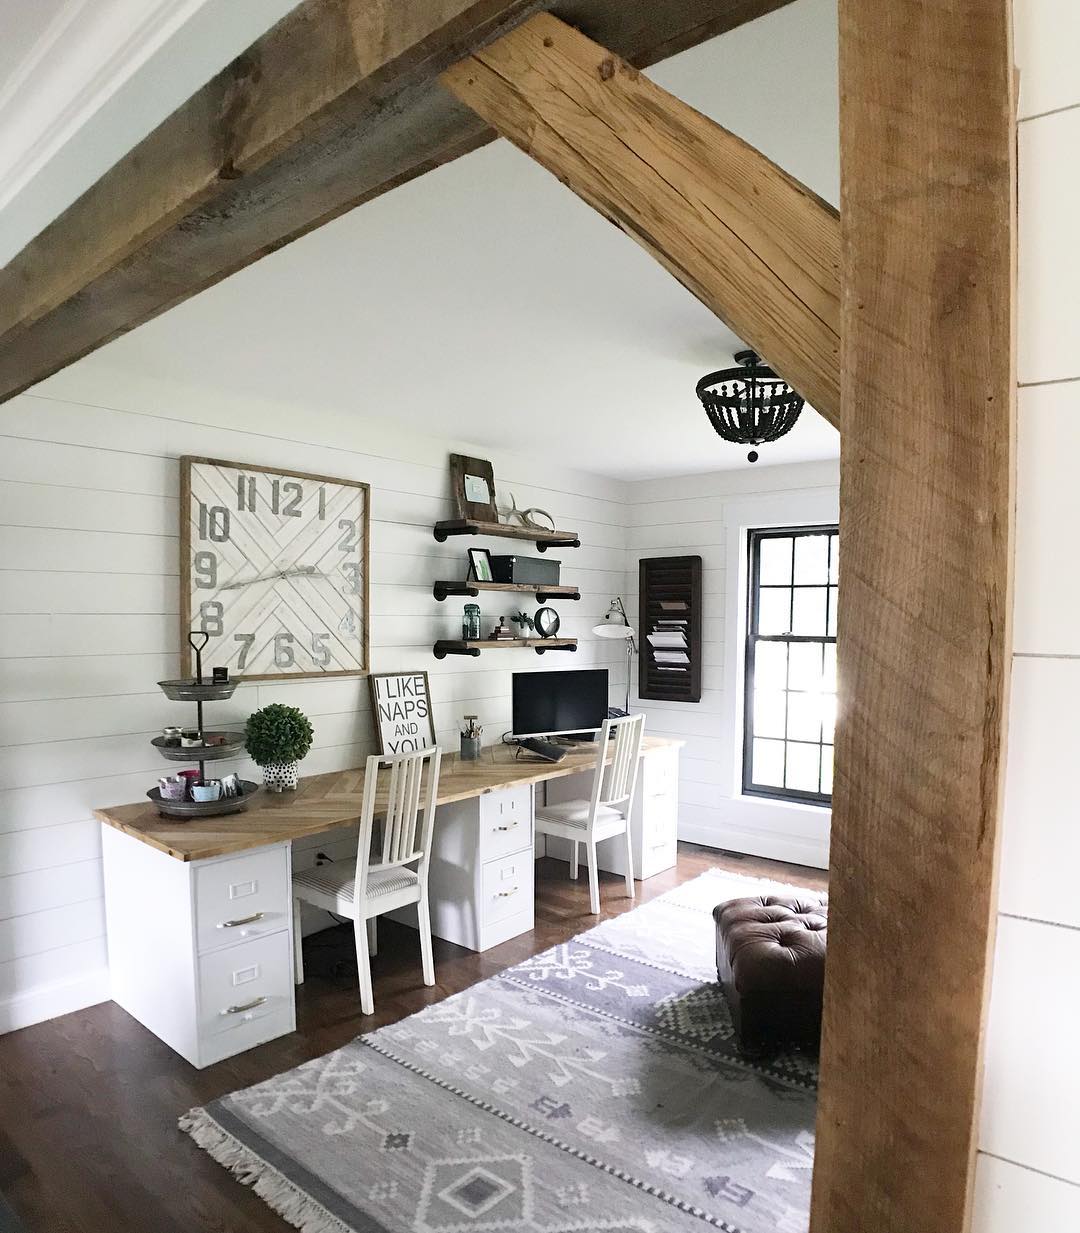 Shared home office in loft space. Photo by Instagram user @lovehomemadehome